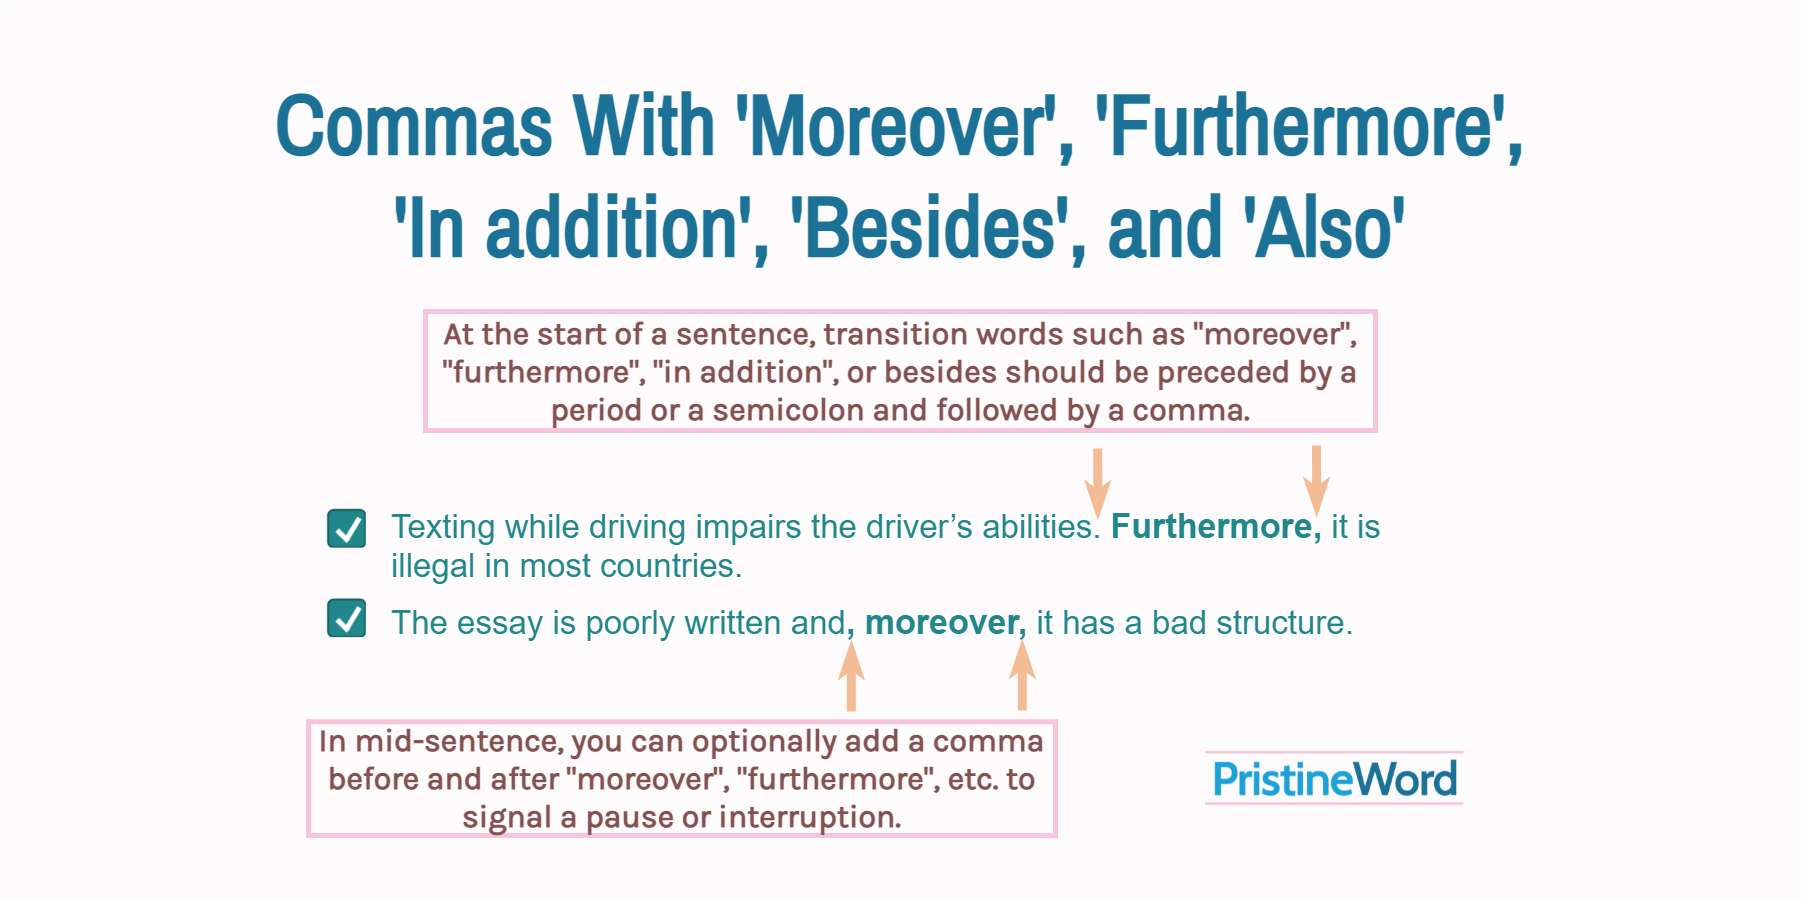 Commas With 'Moreover', 'Furthermore', 'In addition', 'Besides', and 'Also'